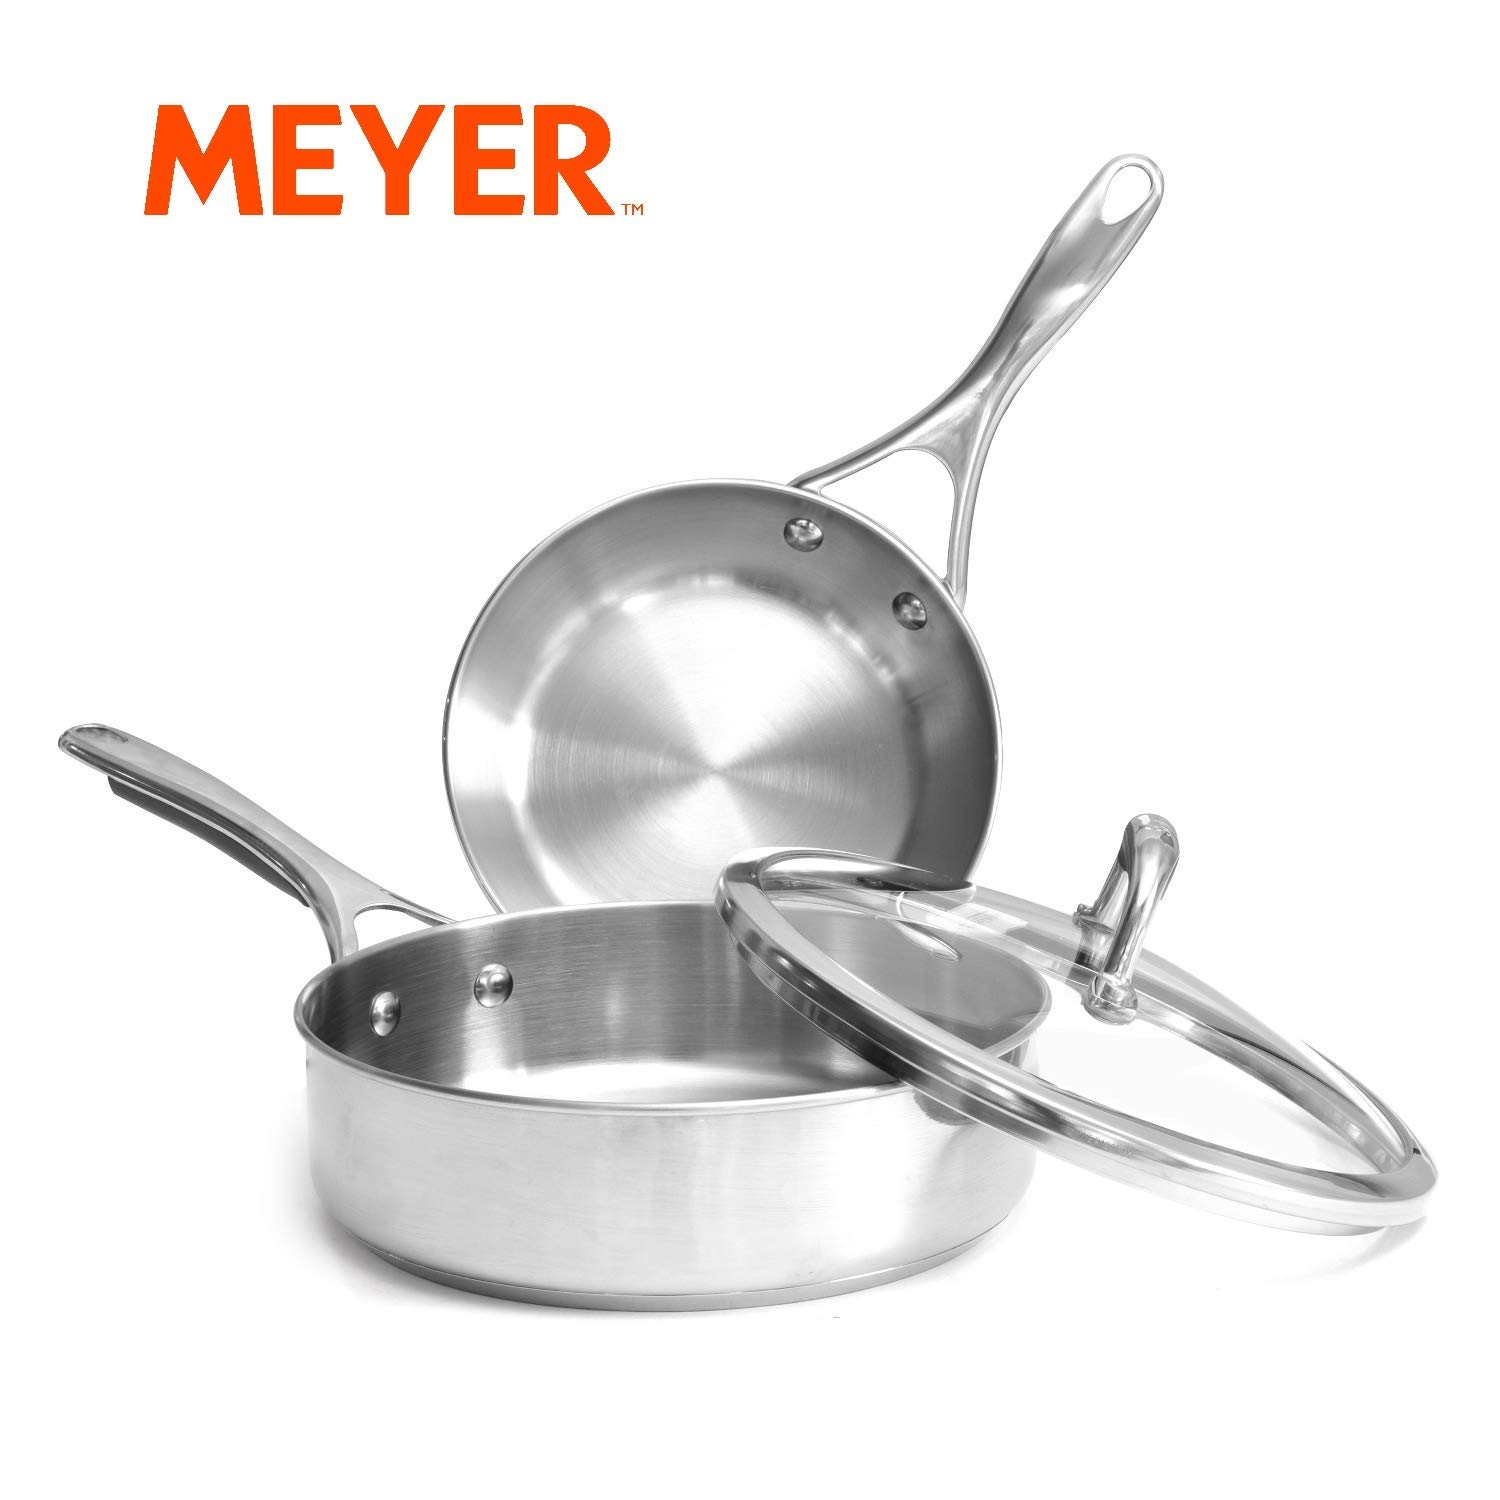 Meyer - Best Stainless Steel Cookware Brands in India